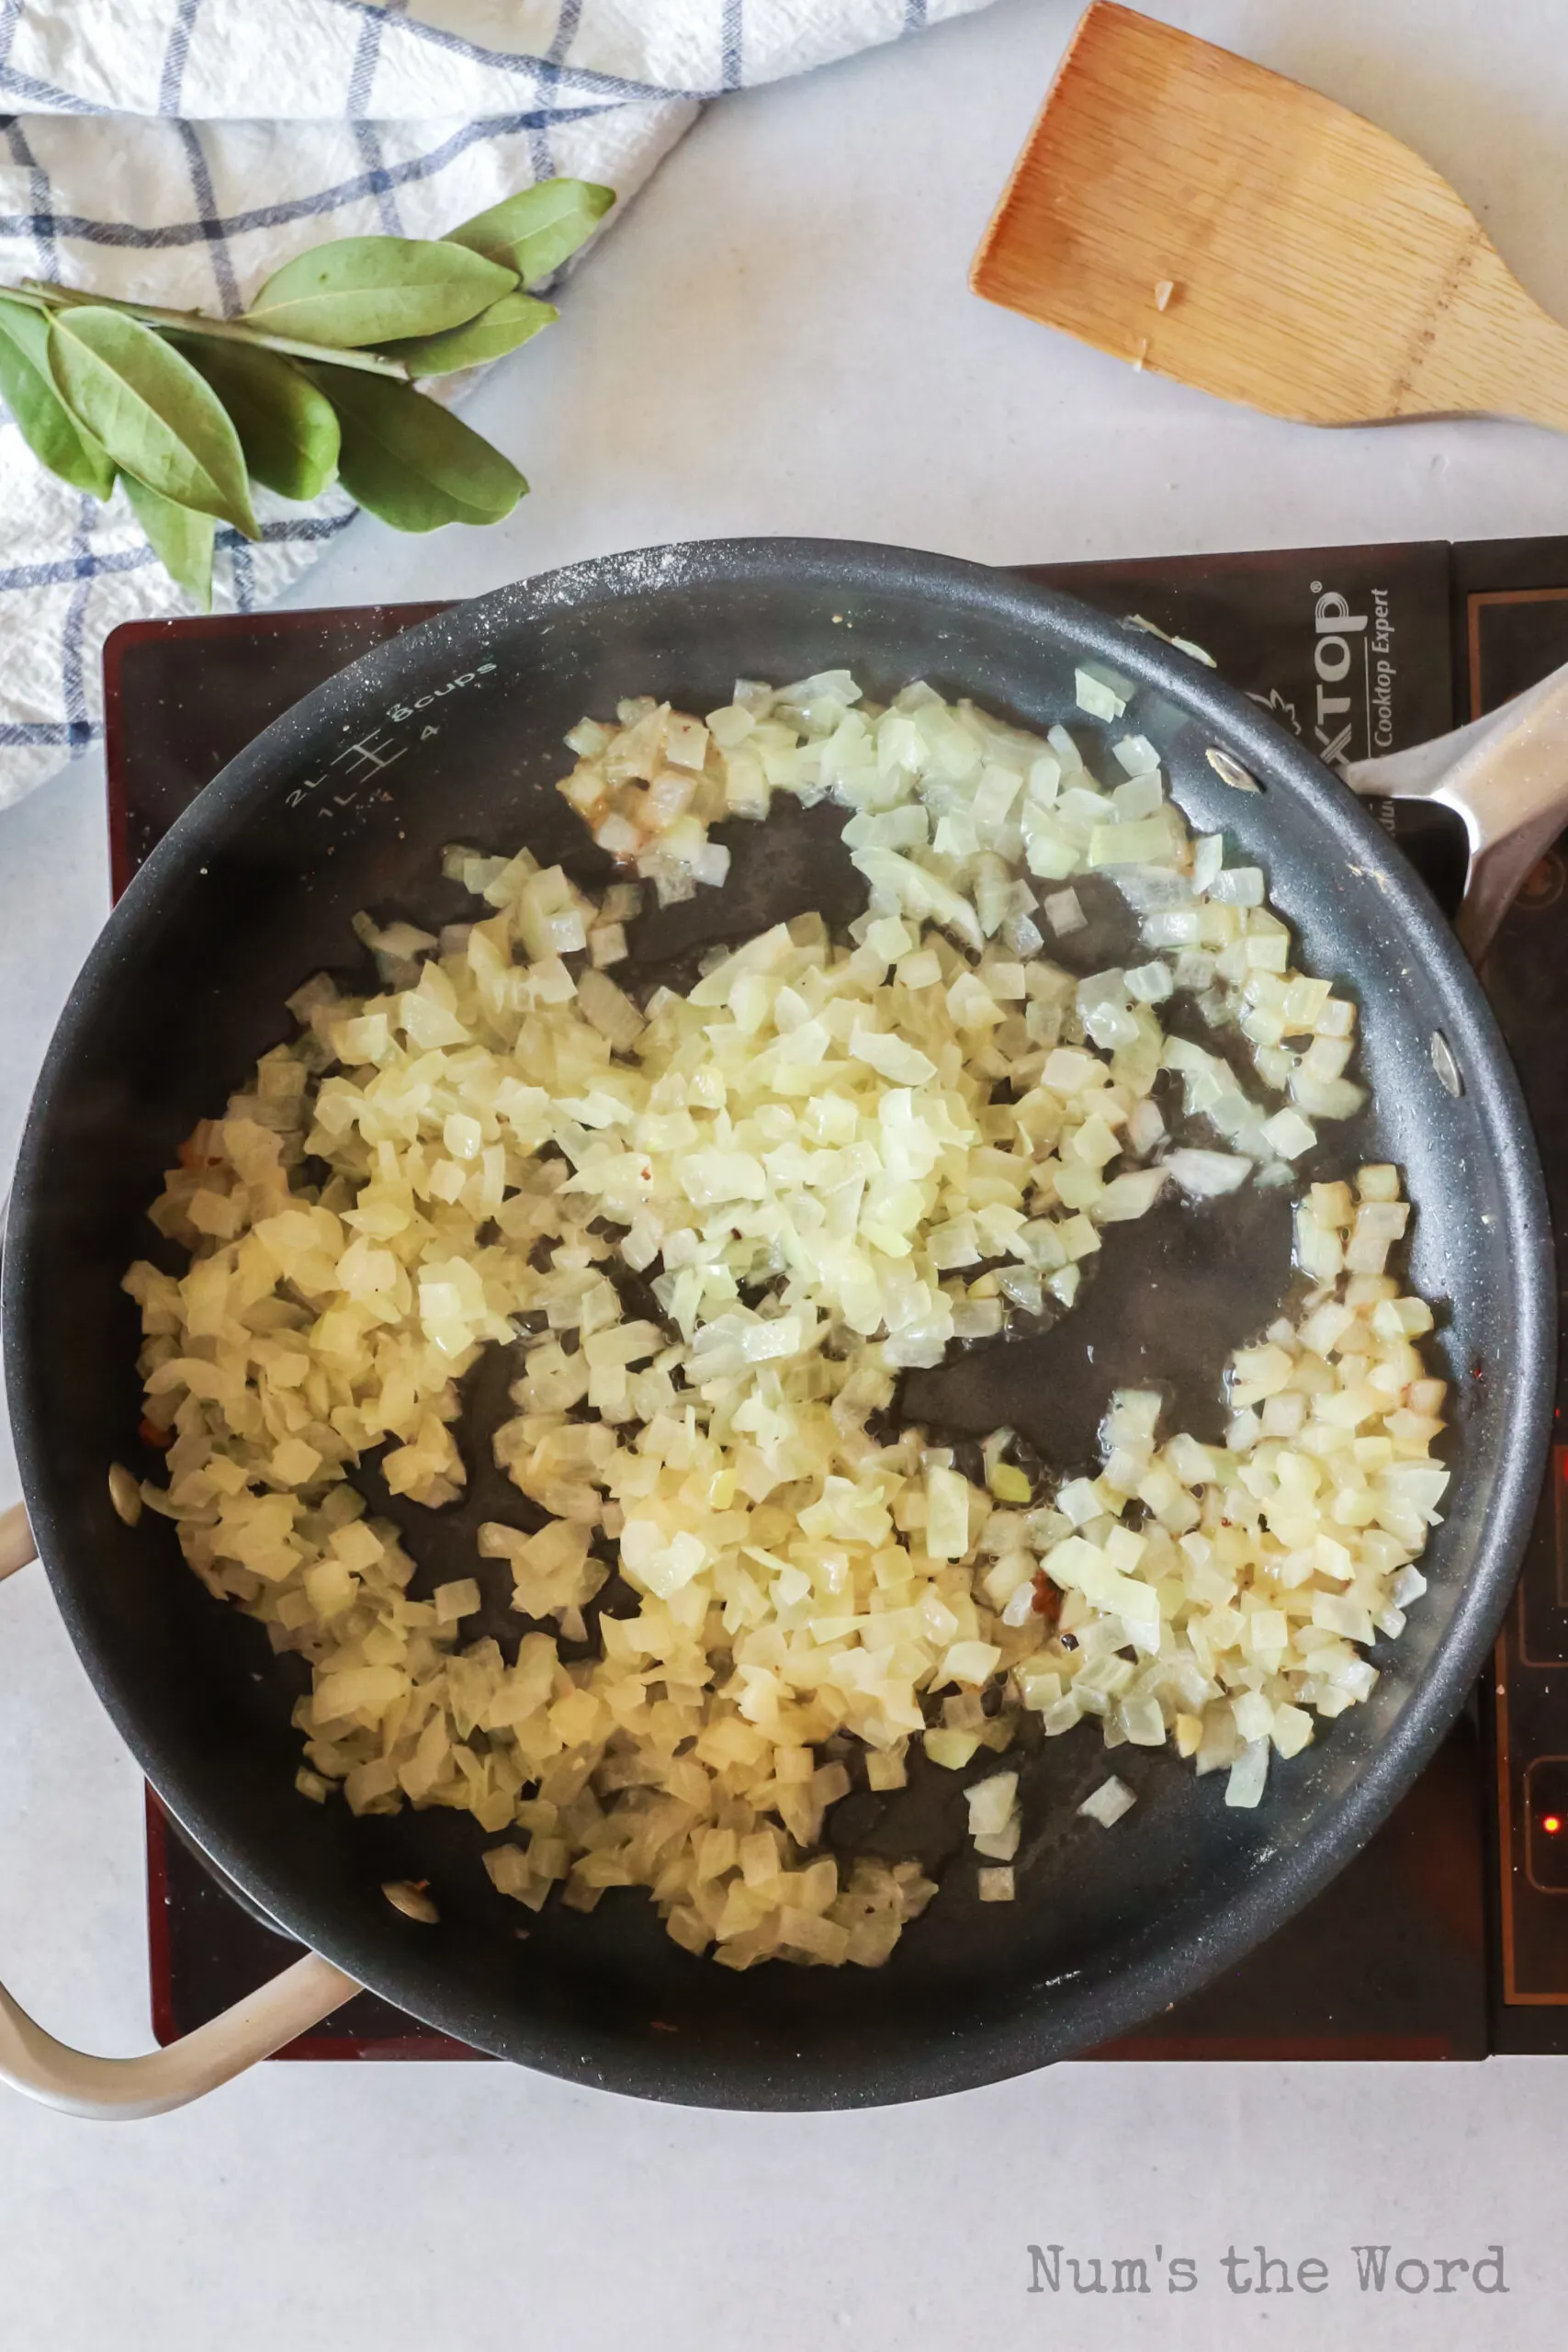 Onion being sautéed in skillet before adding it to the crock pot.